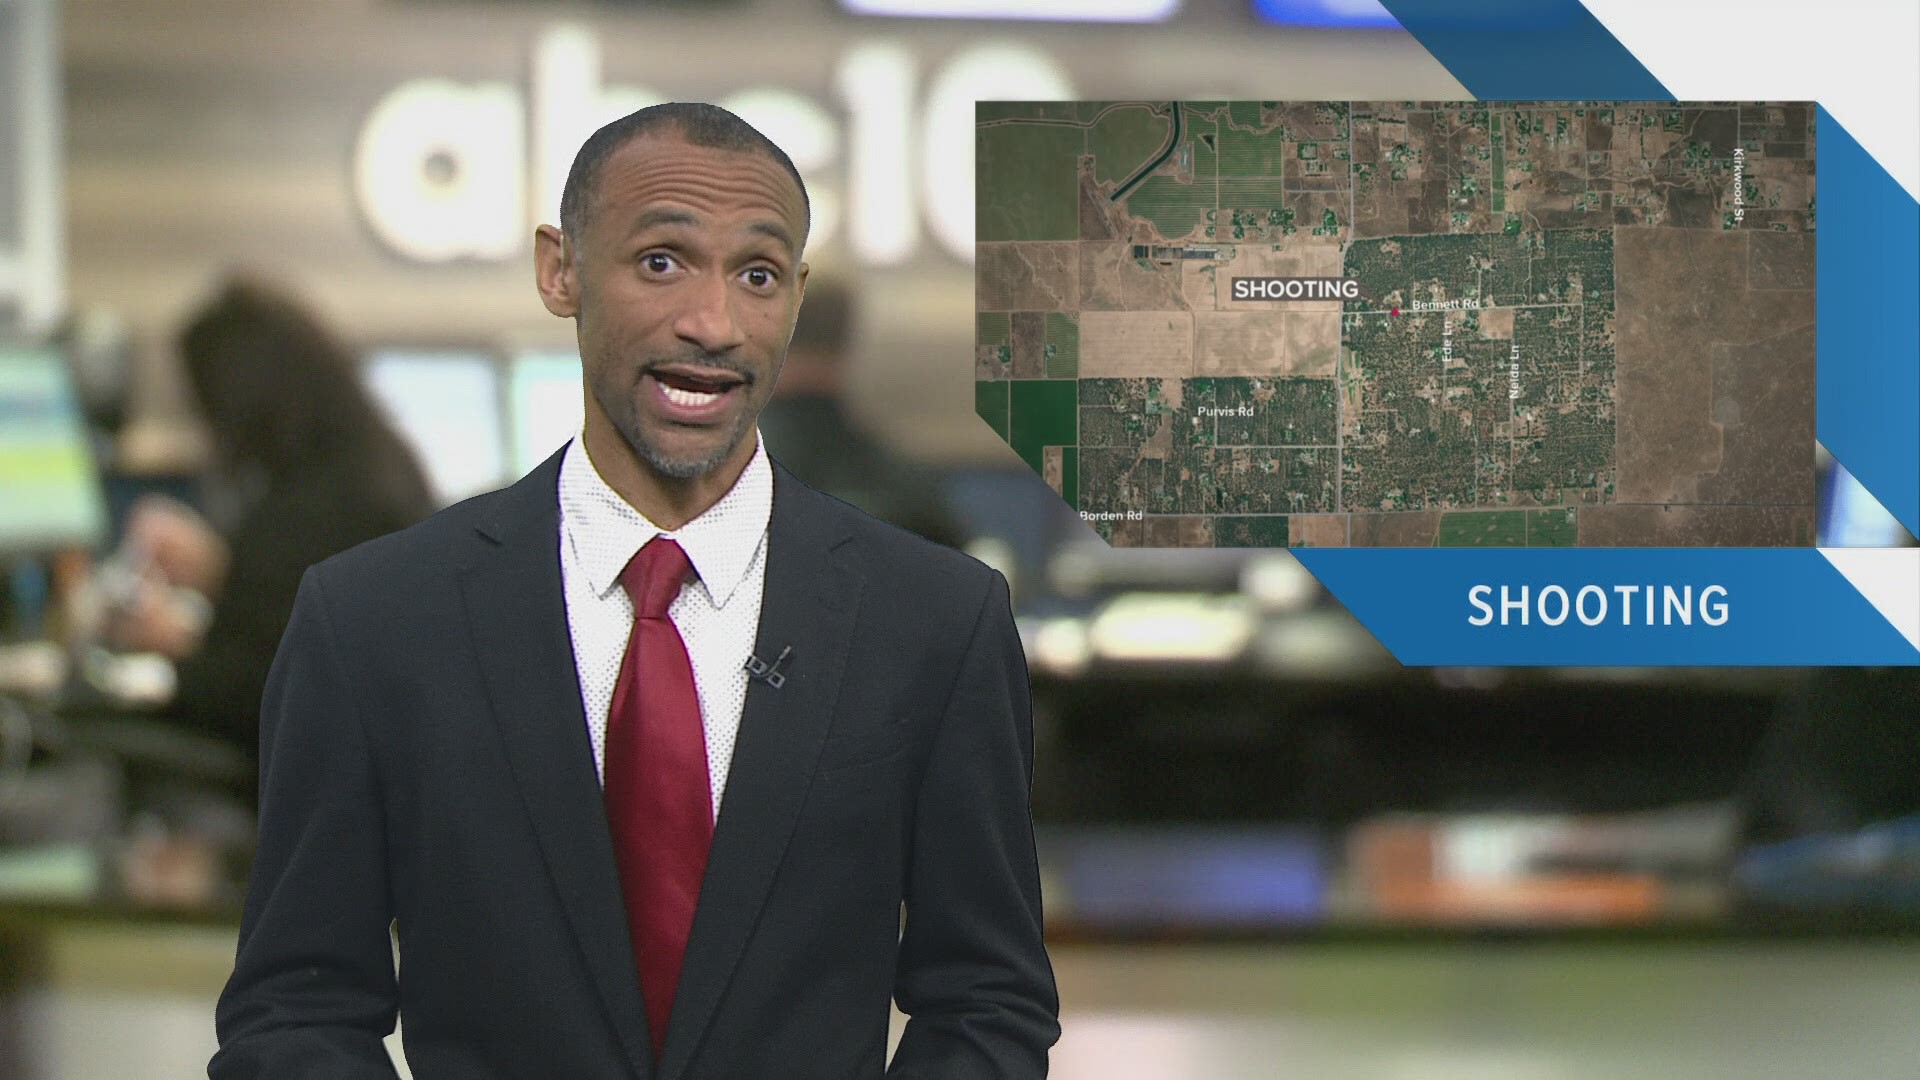 Evening Headlines: Oct. 6, 2019 | Catch in-depth reporting on #LateNewsTonight at 11 p.m. | The latest Sacramento news is always at www.abc10.com.